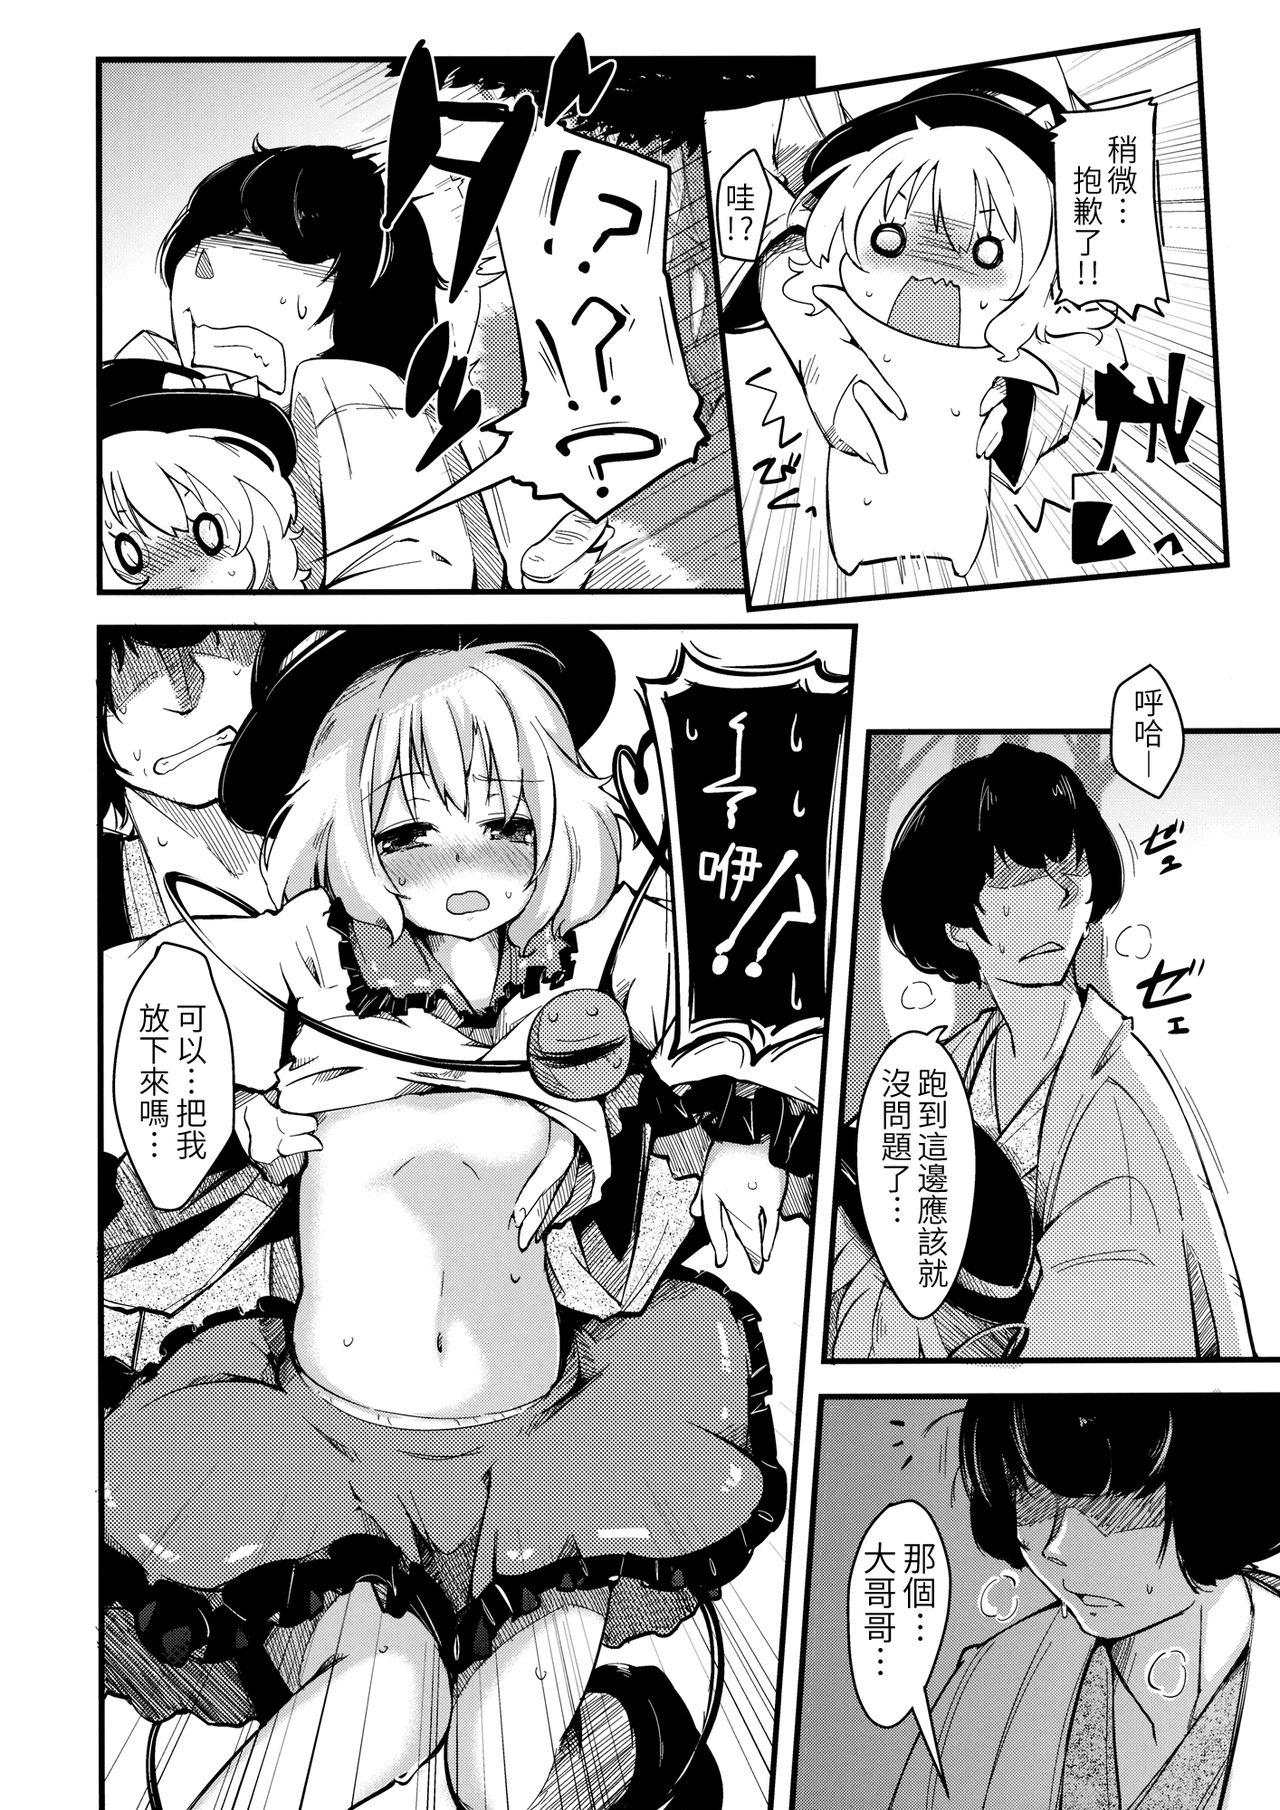 Dirty subconscious girl - Touhou project Oldyoung - Page 8